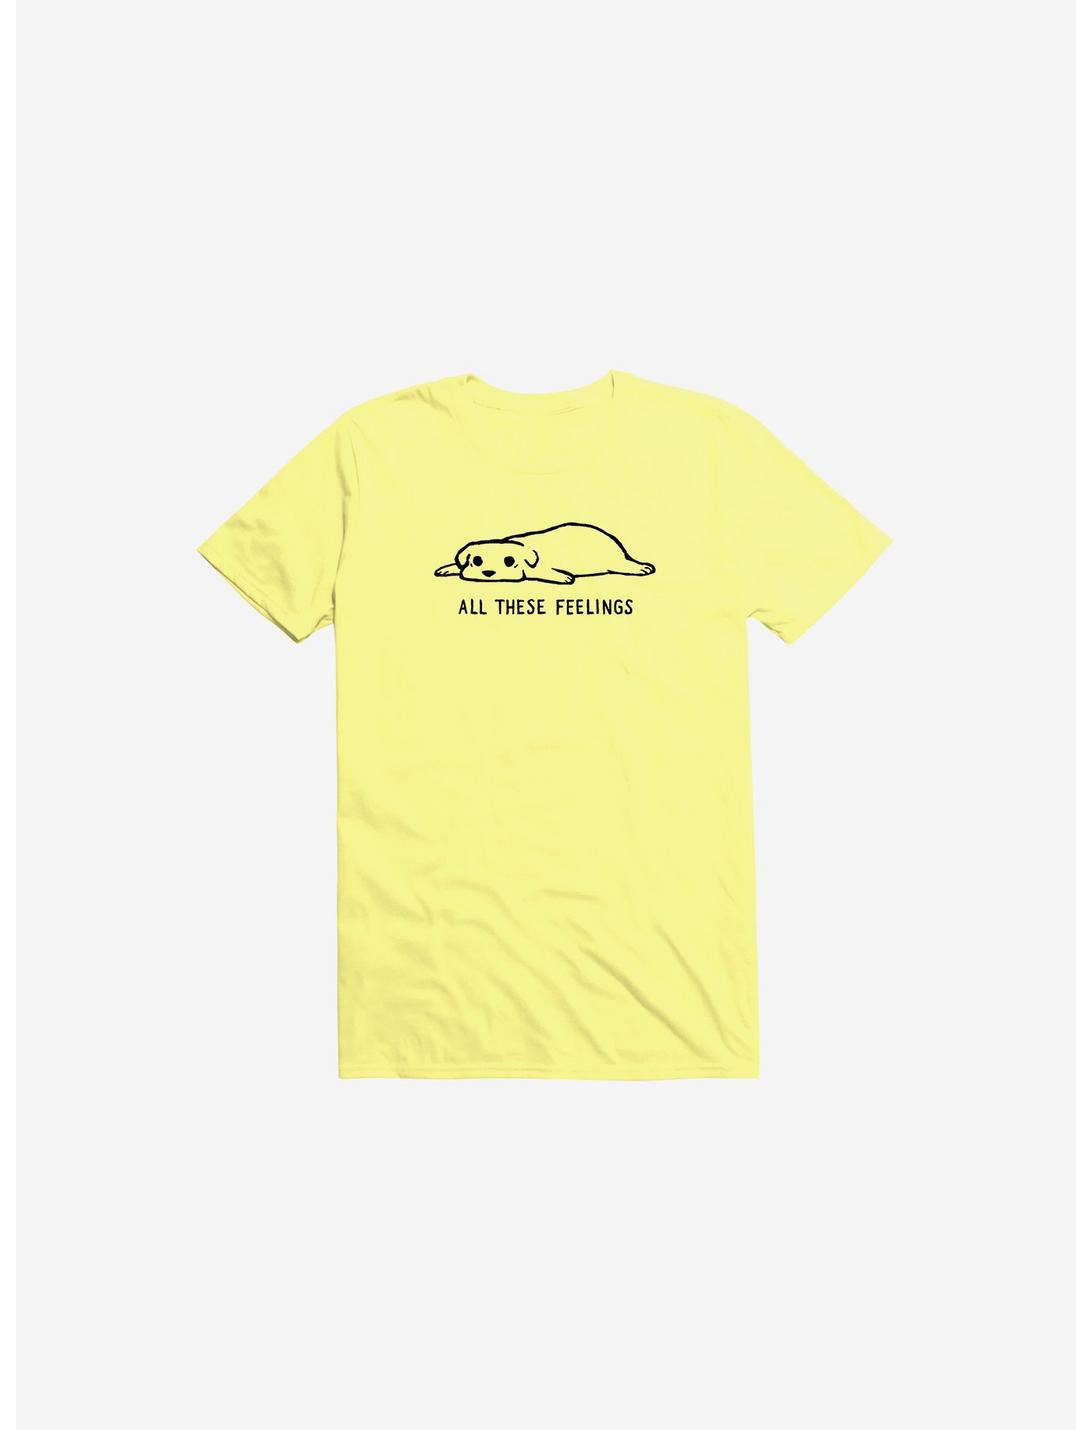 All These Feelings T-Shirt, YELLOW, hi-res